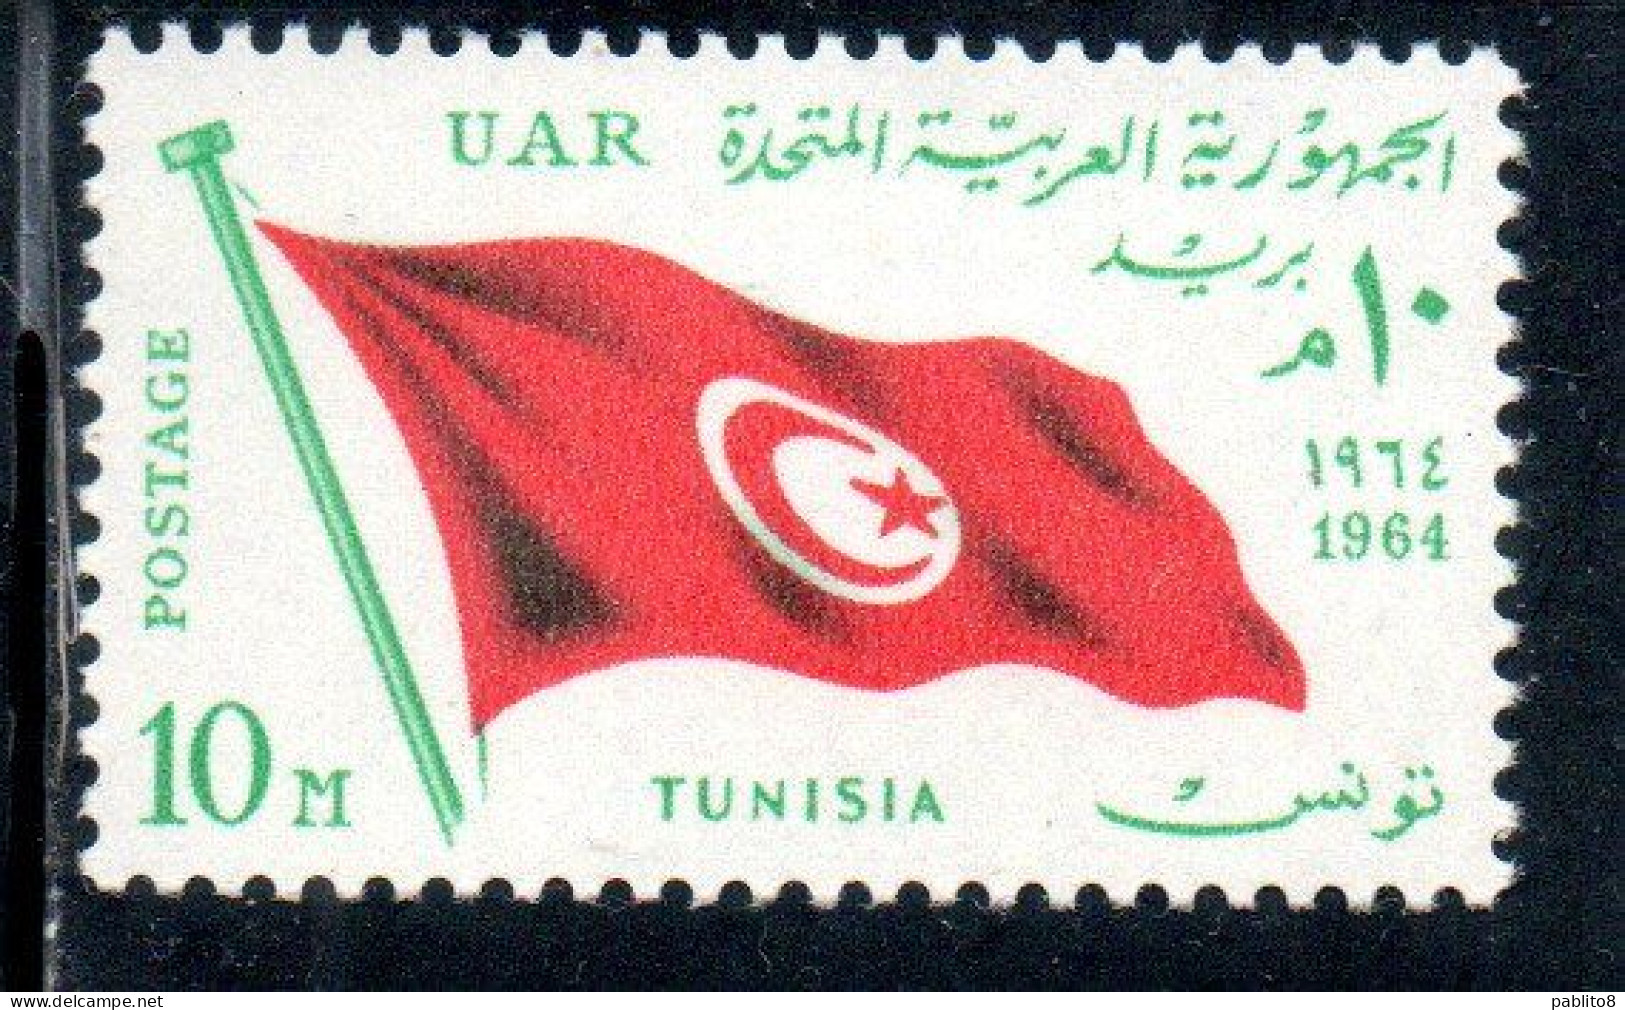 UAR EGYPT EGITTO 1964 SECOND MEETING OF HEADS STATE ARAB LEAGUE FLAG OF TUNISIA 10m MNH - Unused Stamps